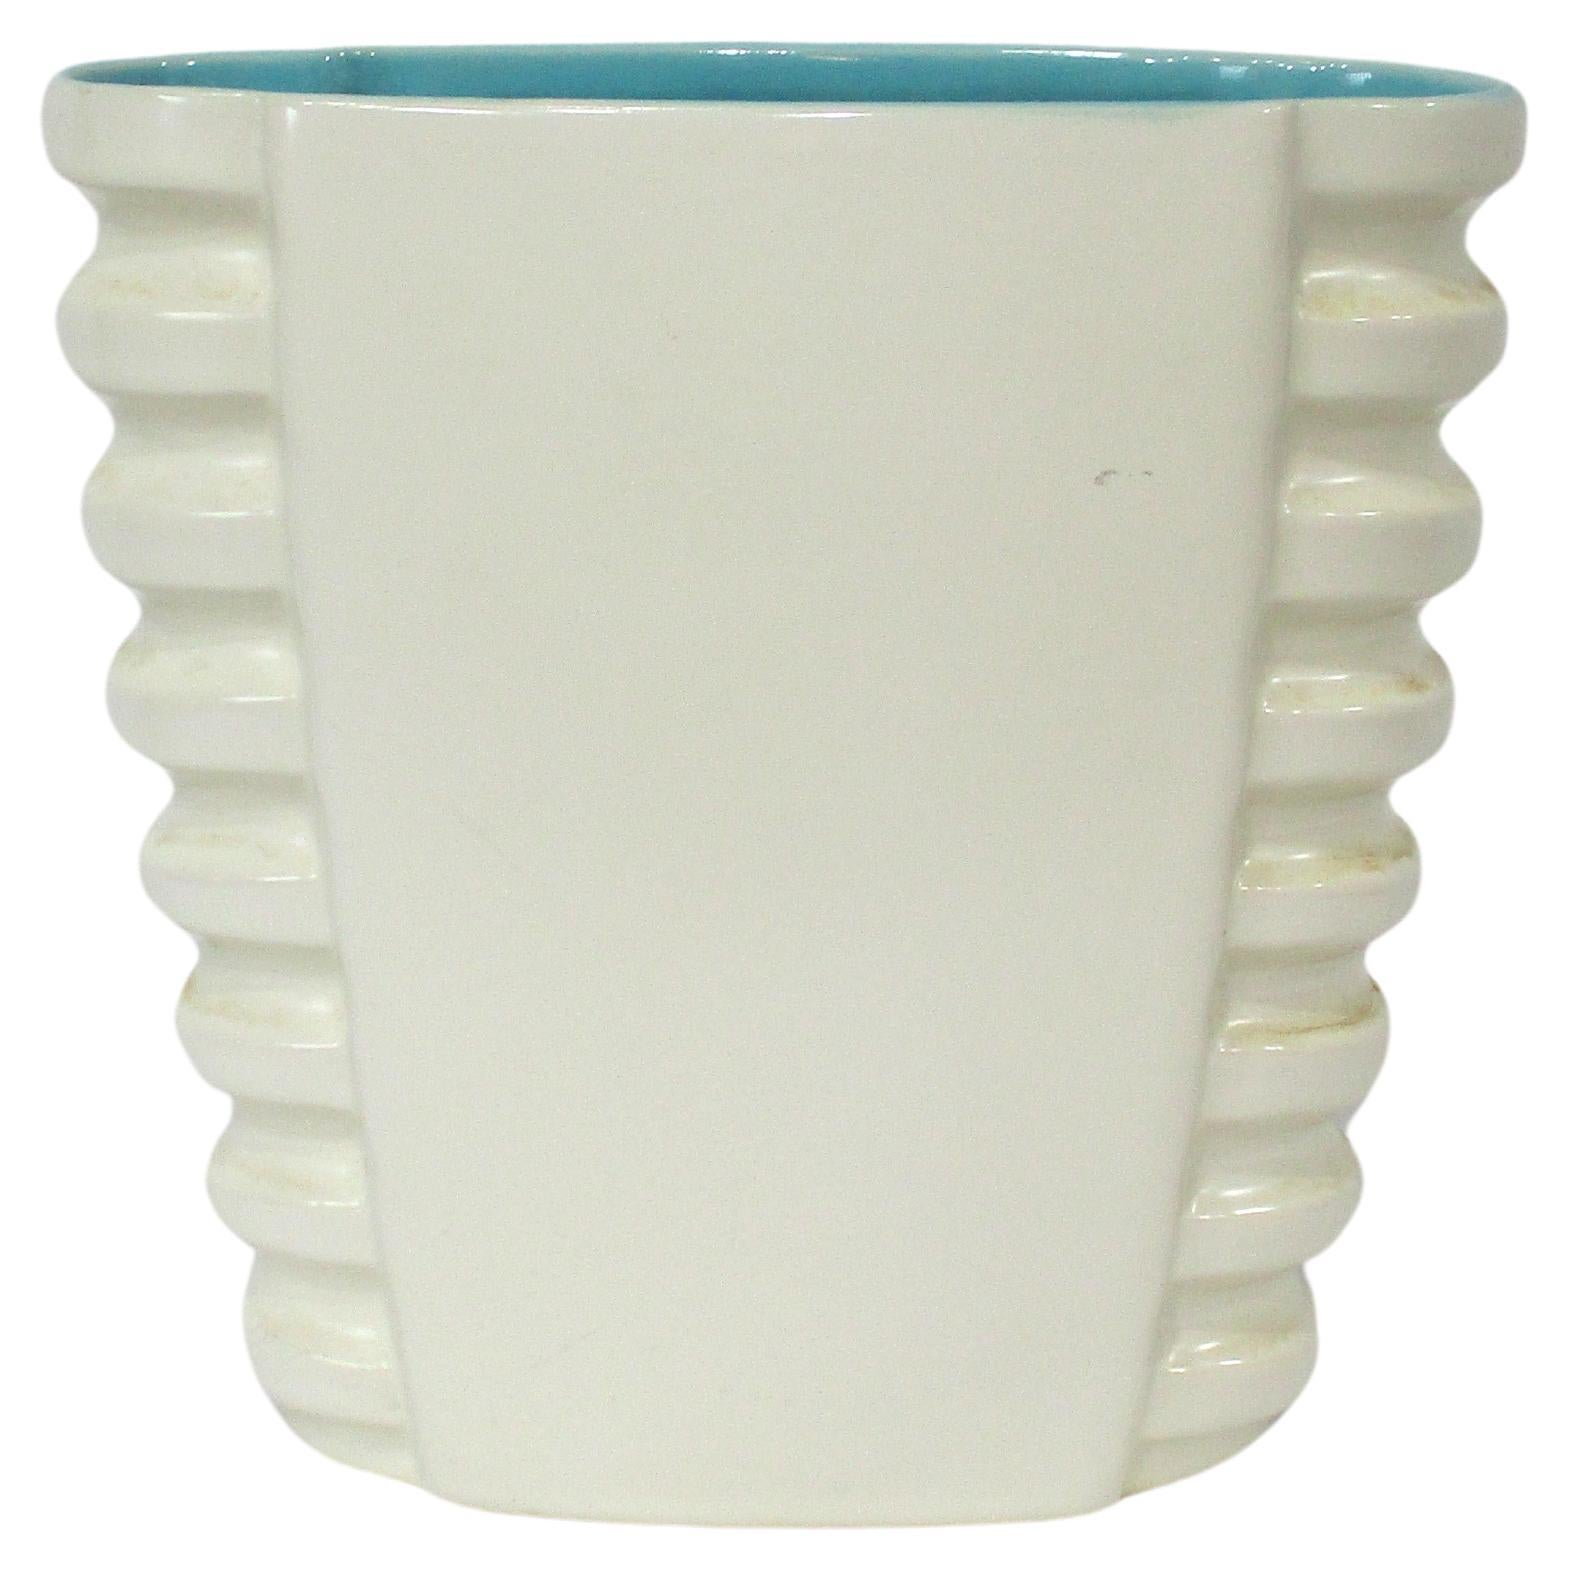 A very nice ribbed Mid Century vase with buttery smooth off white glaze and a turquoise interior . Crafted by the Catalina Pottery company located on Catalina Inland but moving manufacturing to the GMB Pottery company California . The vase can work